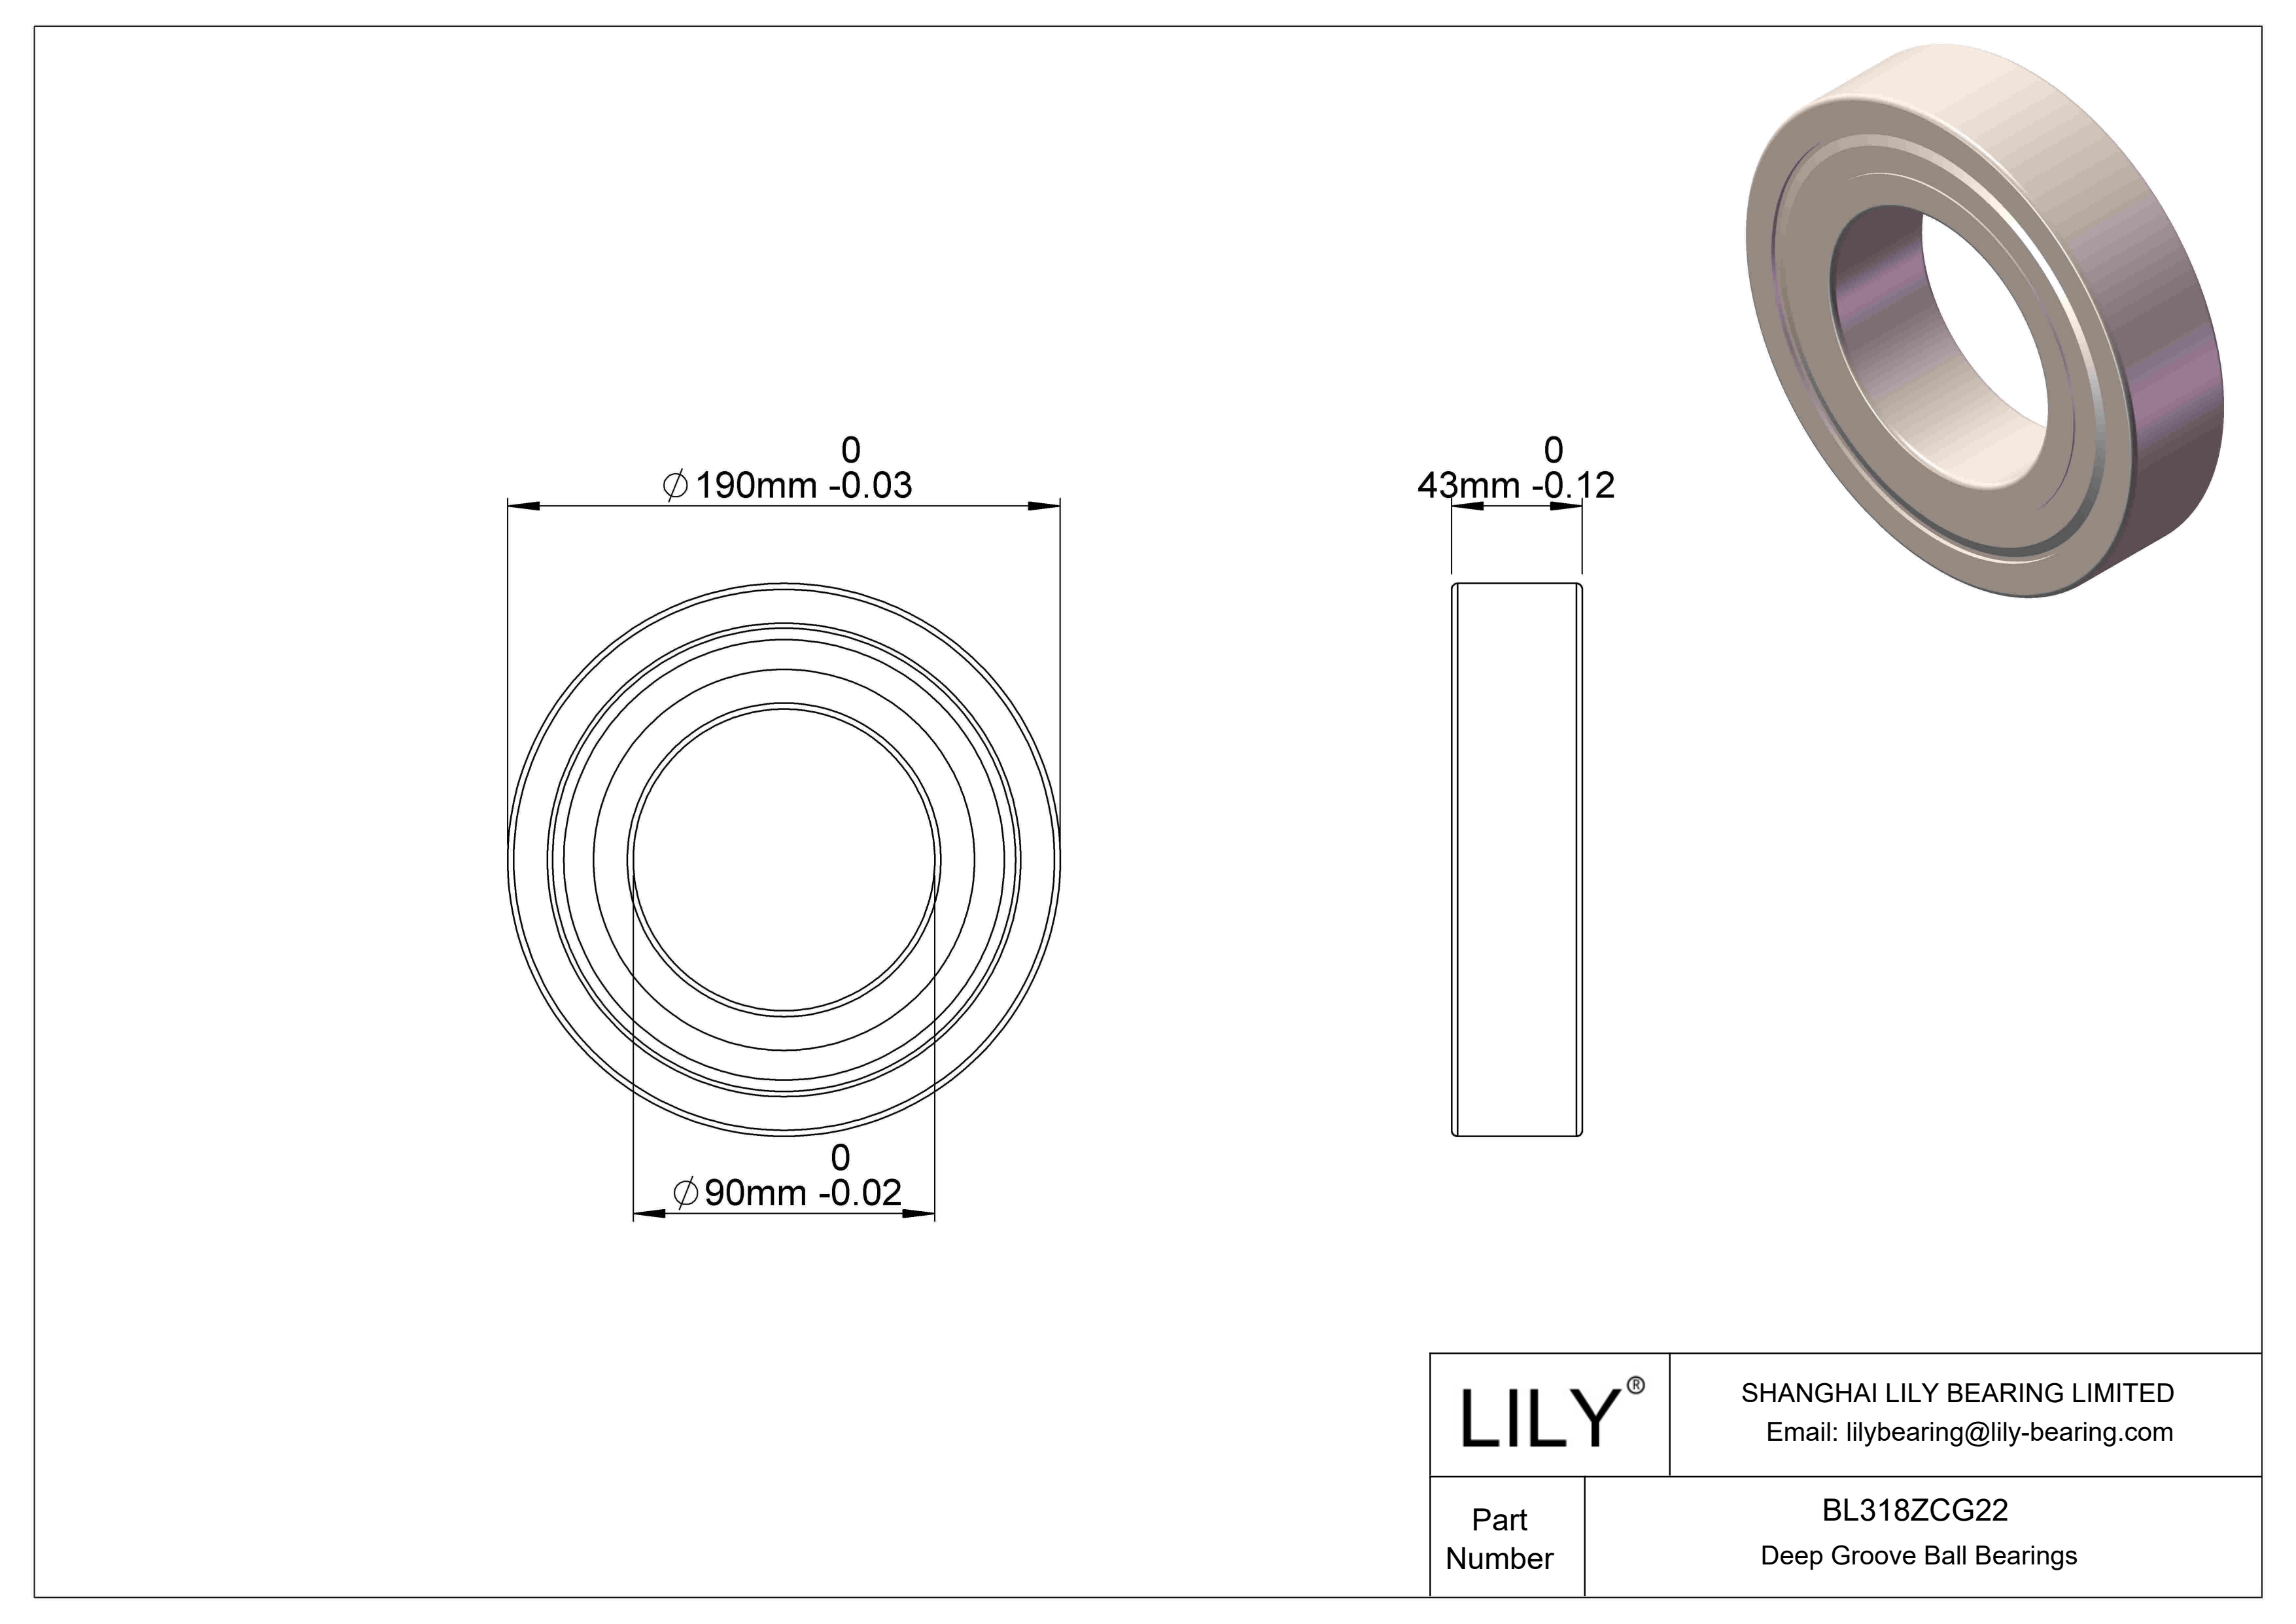 BL318ZCG22 General Deep Groove Ball Bearing cad drawing